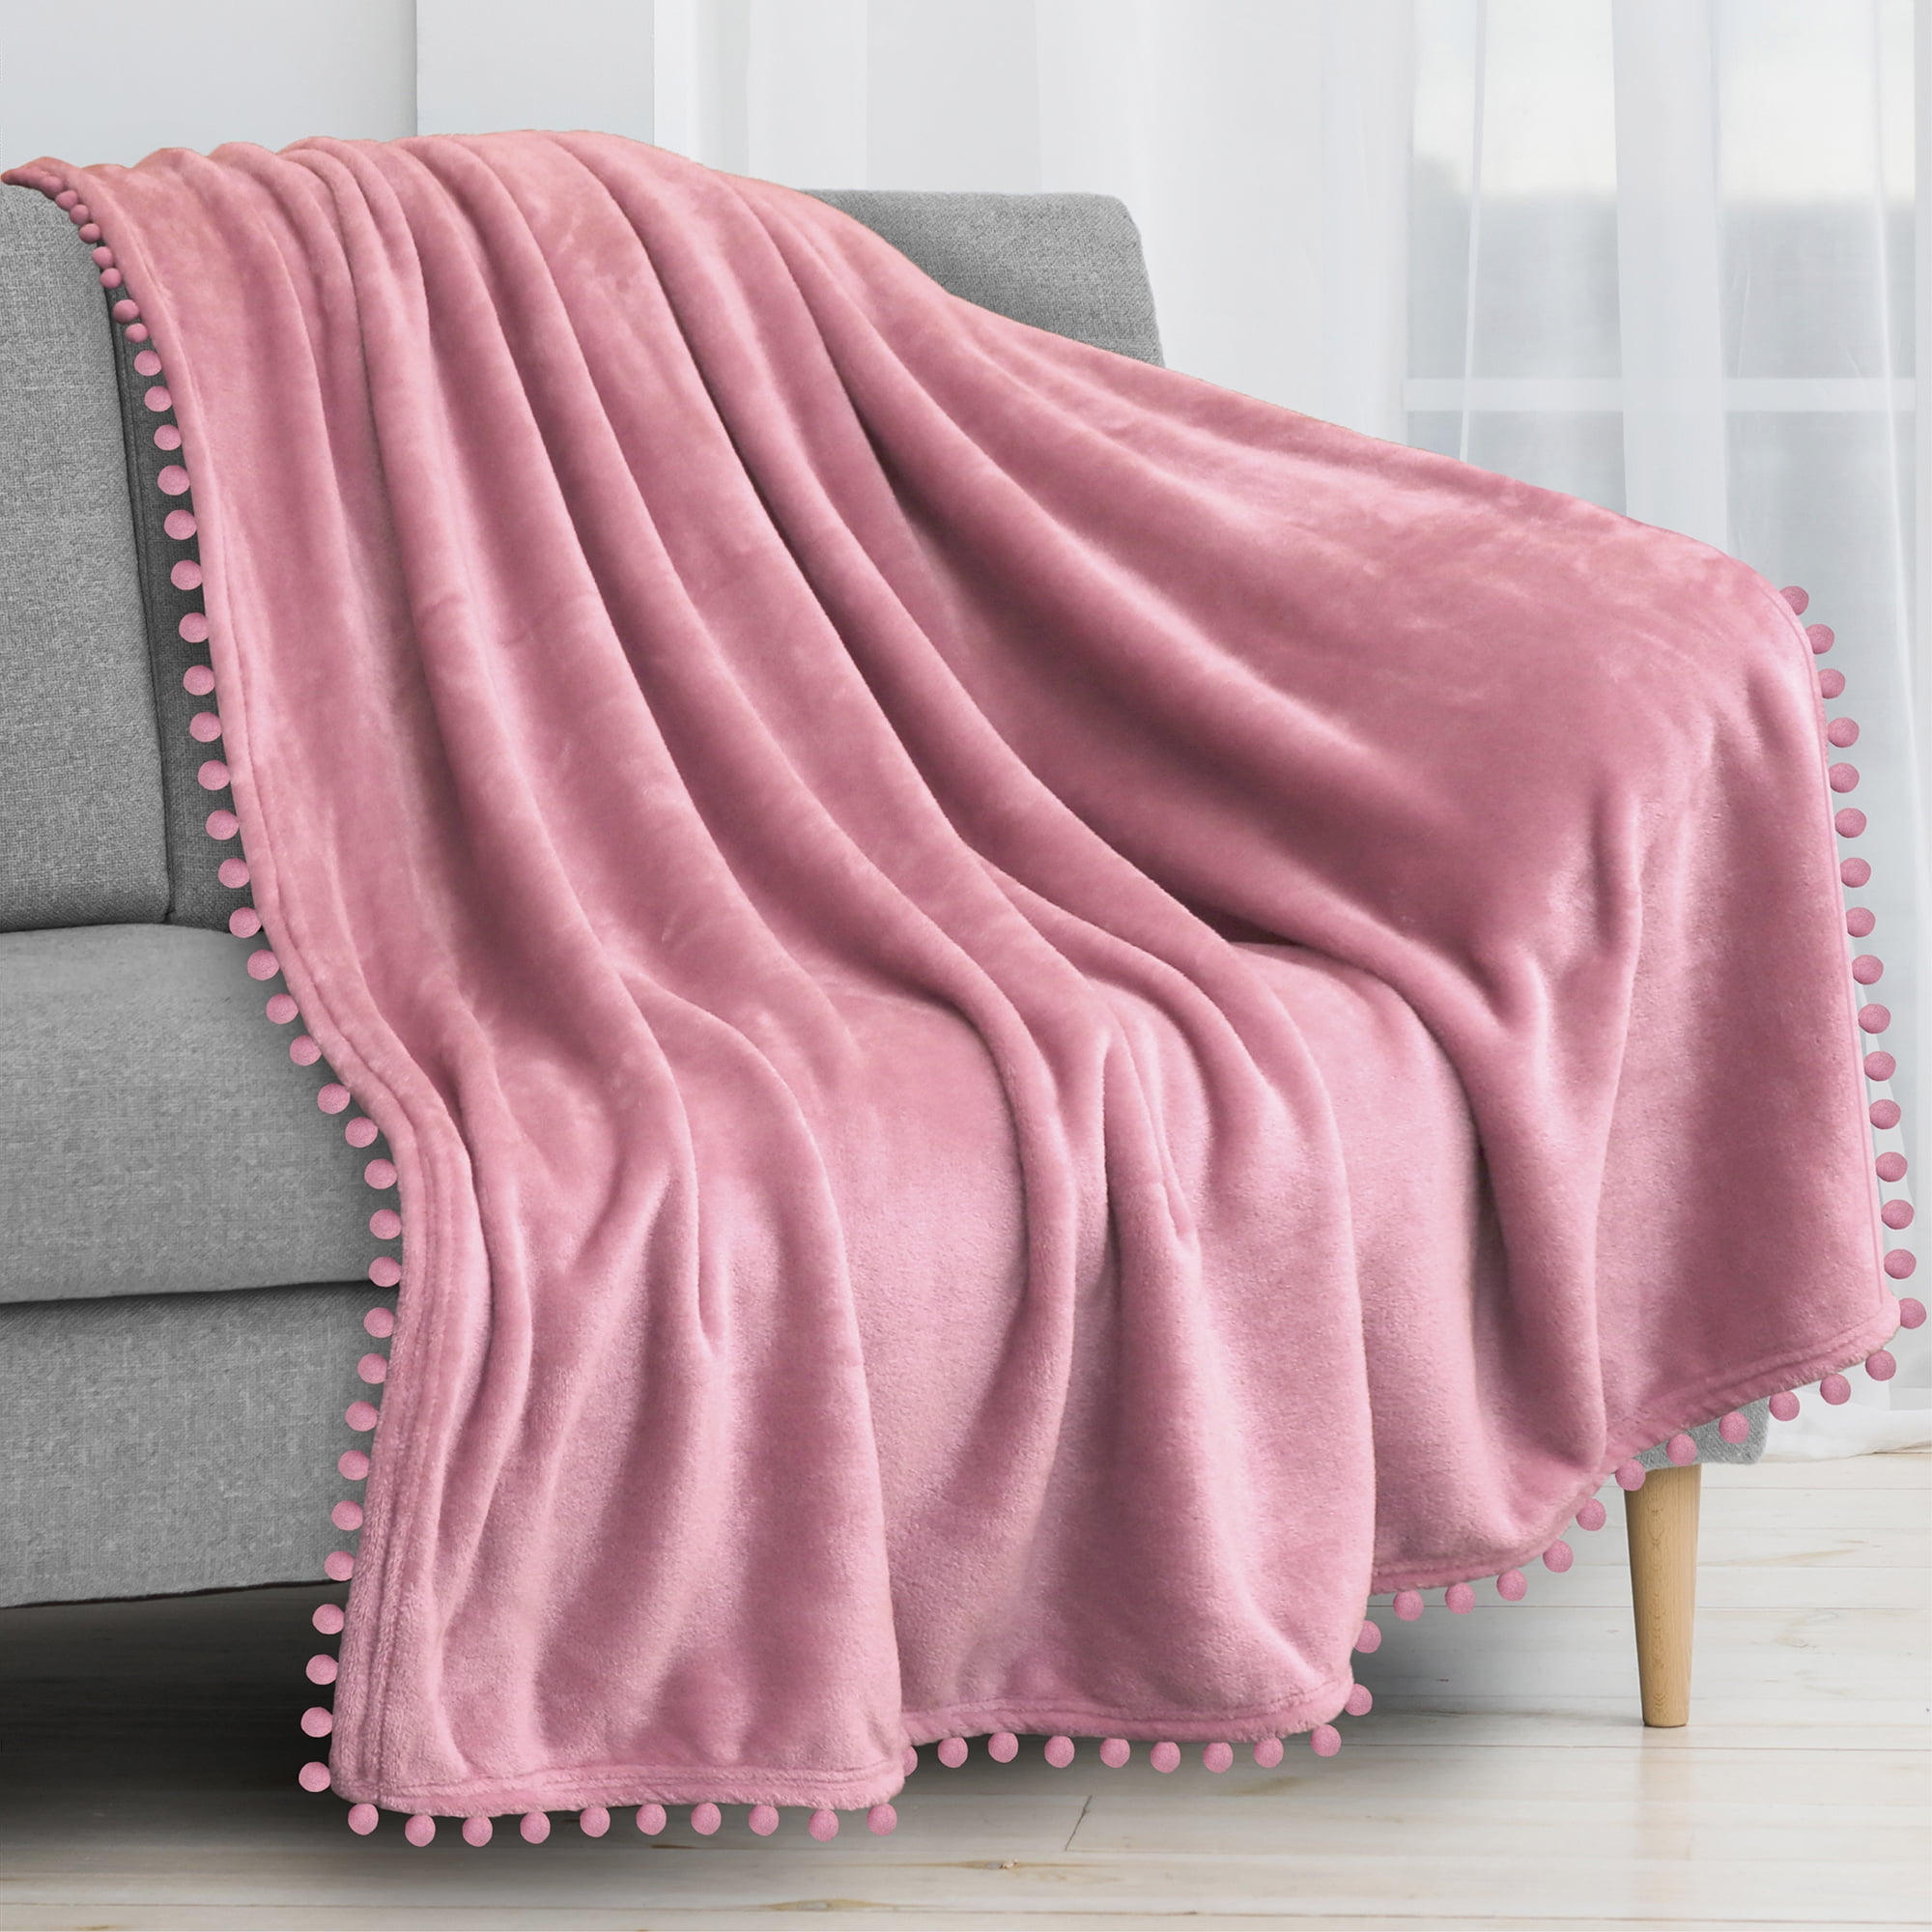 vidaXL Throw Cotton Squares 160x210cm Pink Sofa Bed Blanket Cover Bedspread 